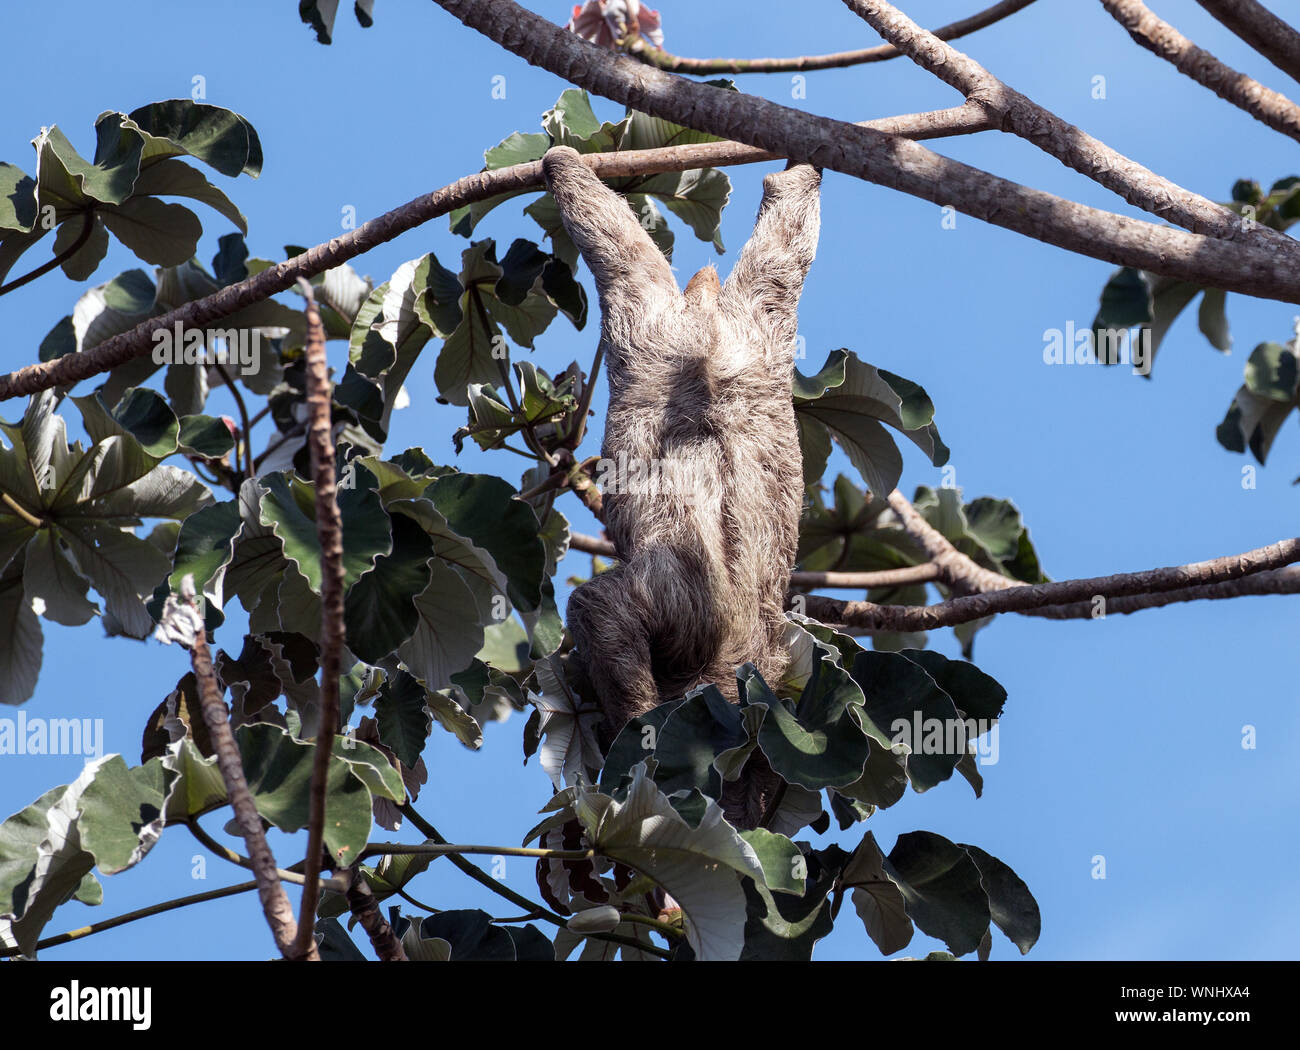 Closeup of Three-towed Sloth hanging up side down feeding in Cecropia tree in Panama.Scientific name of this mammal is Bradypus varigatus. Stock Photo